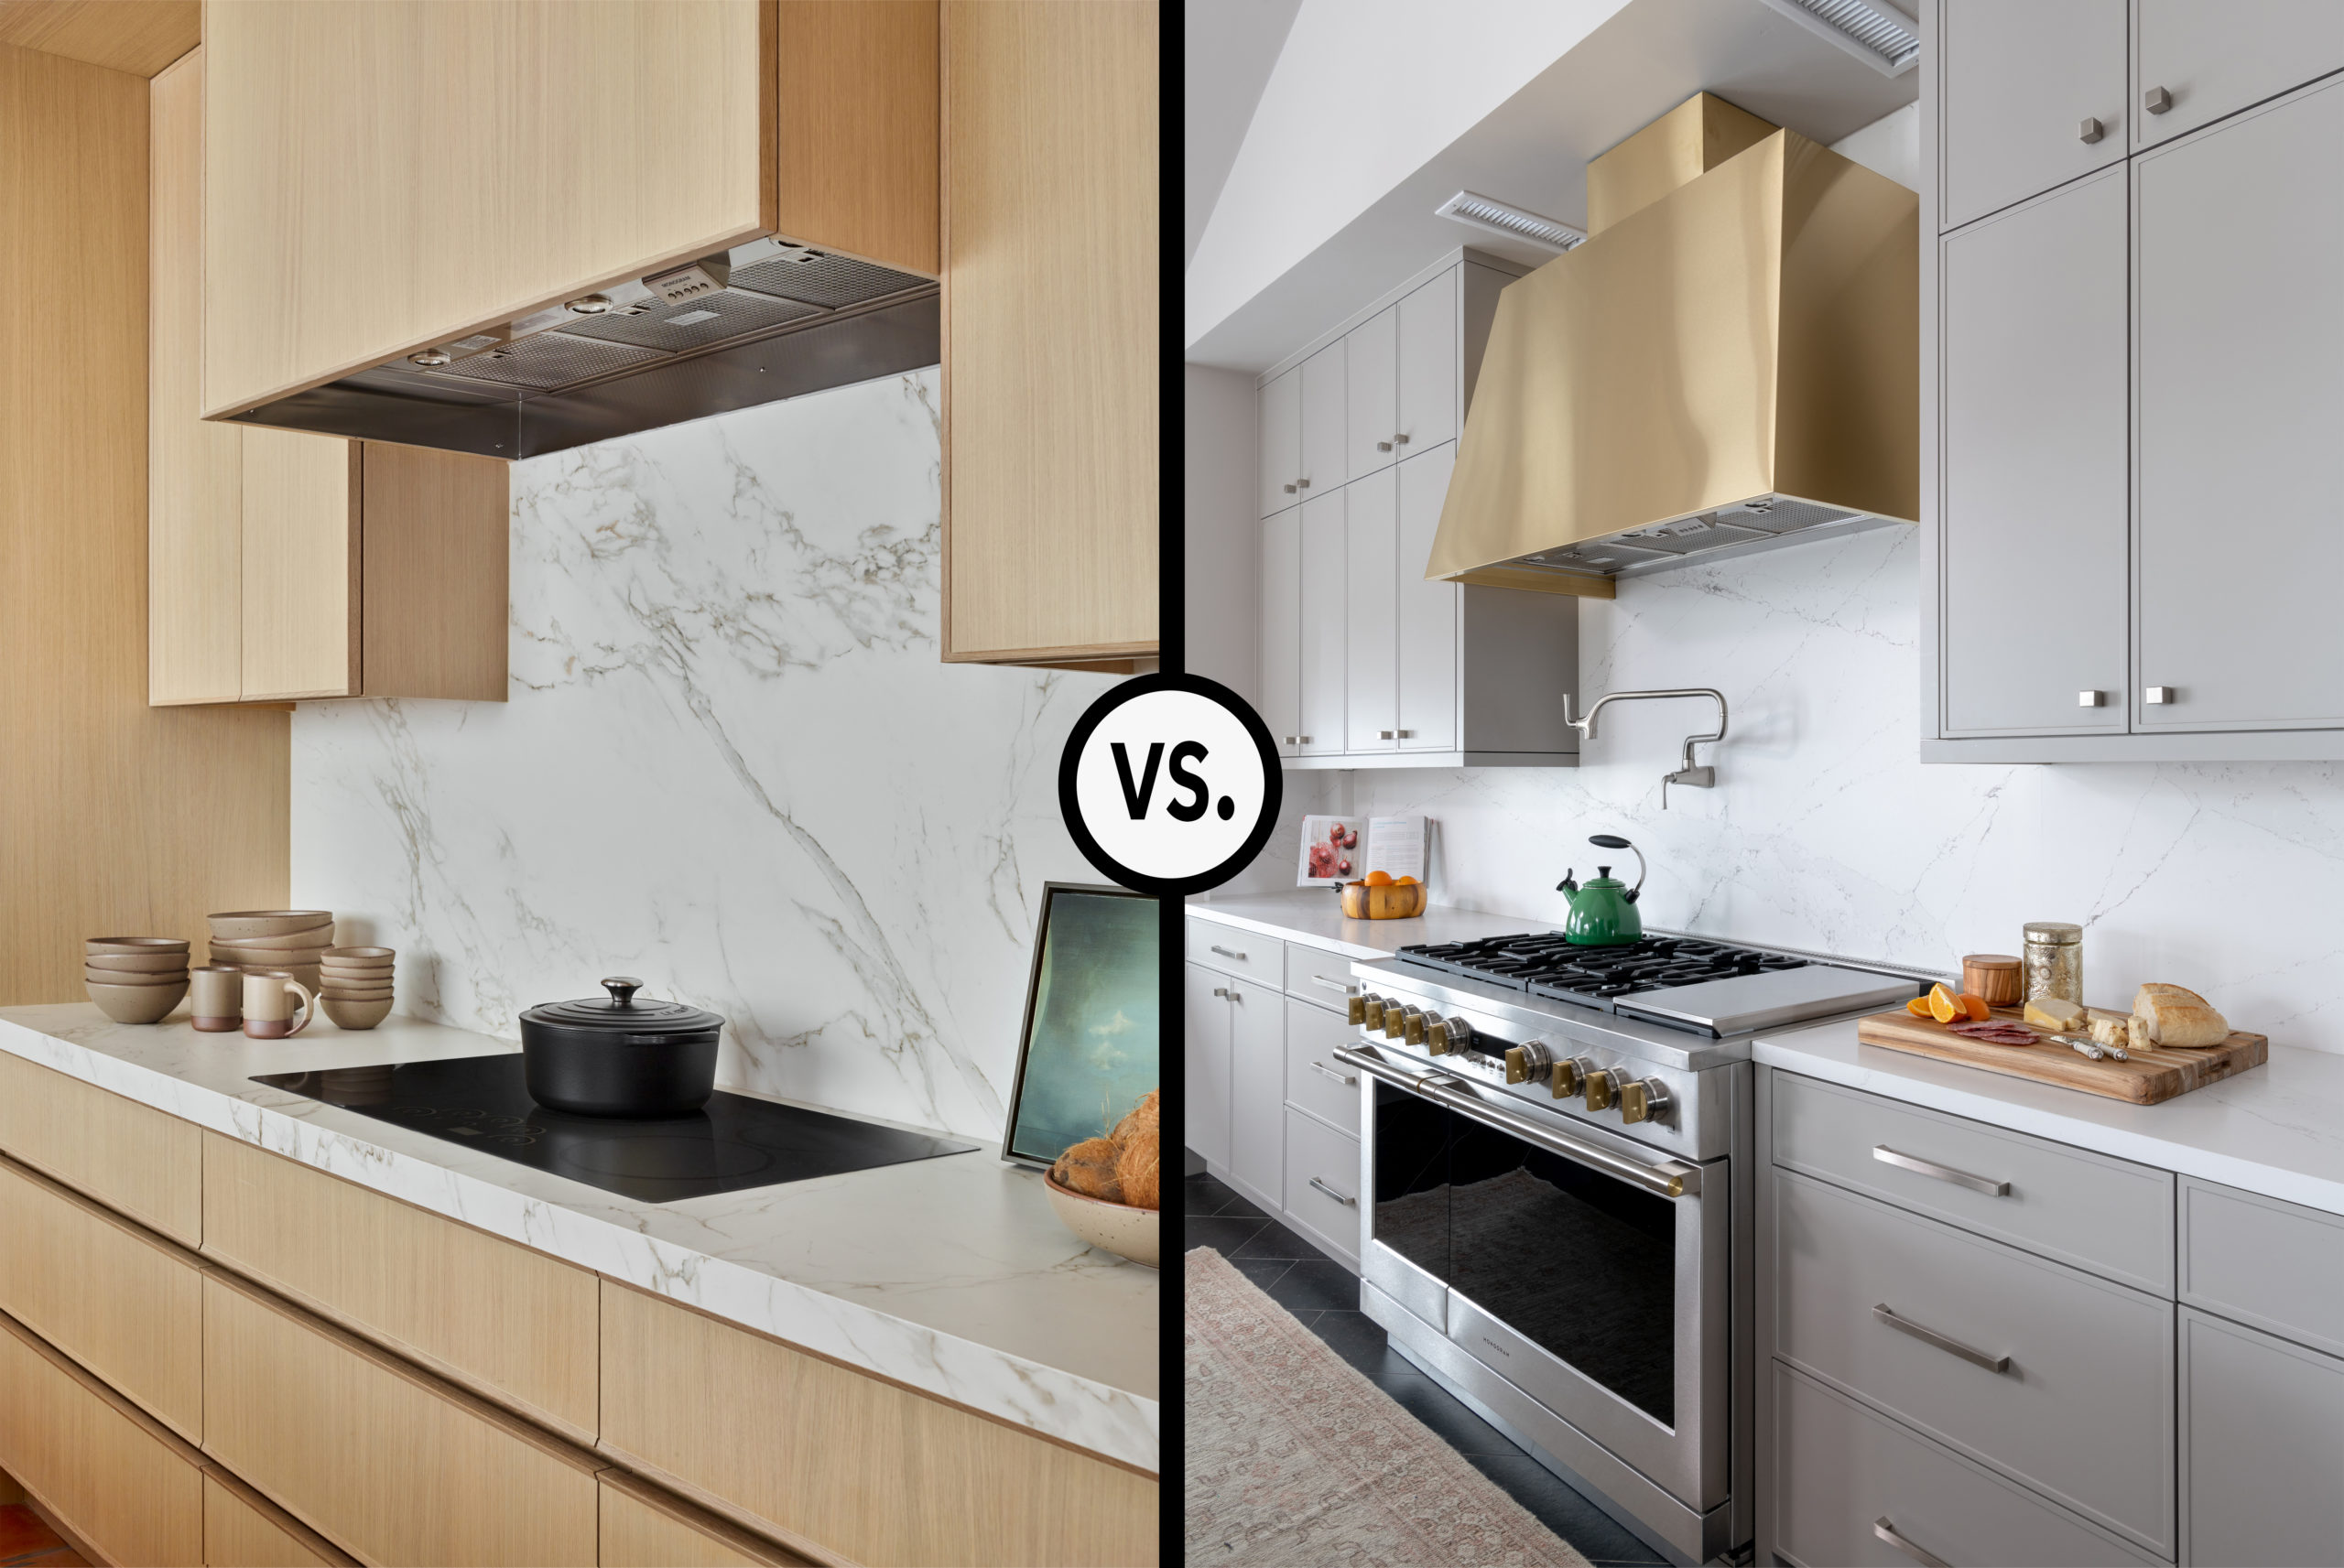 Redesigning Your Kitchen? Here's Why a Cooktop Is Better Than a